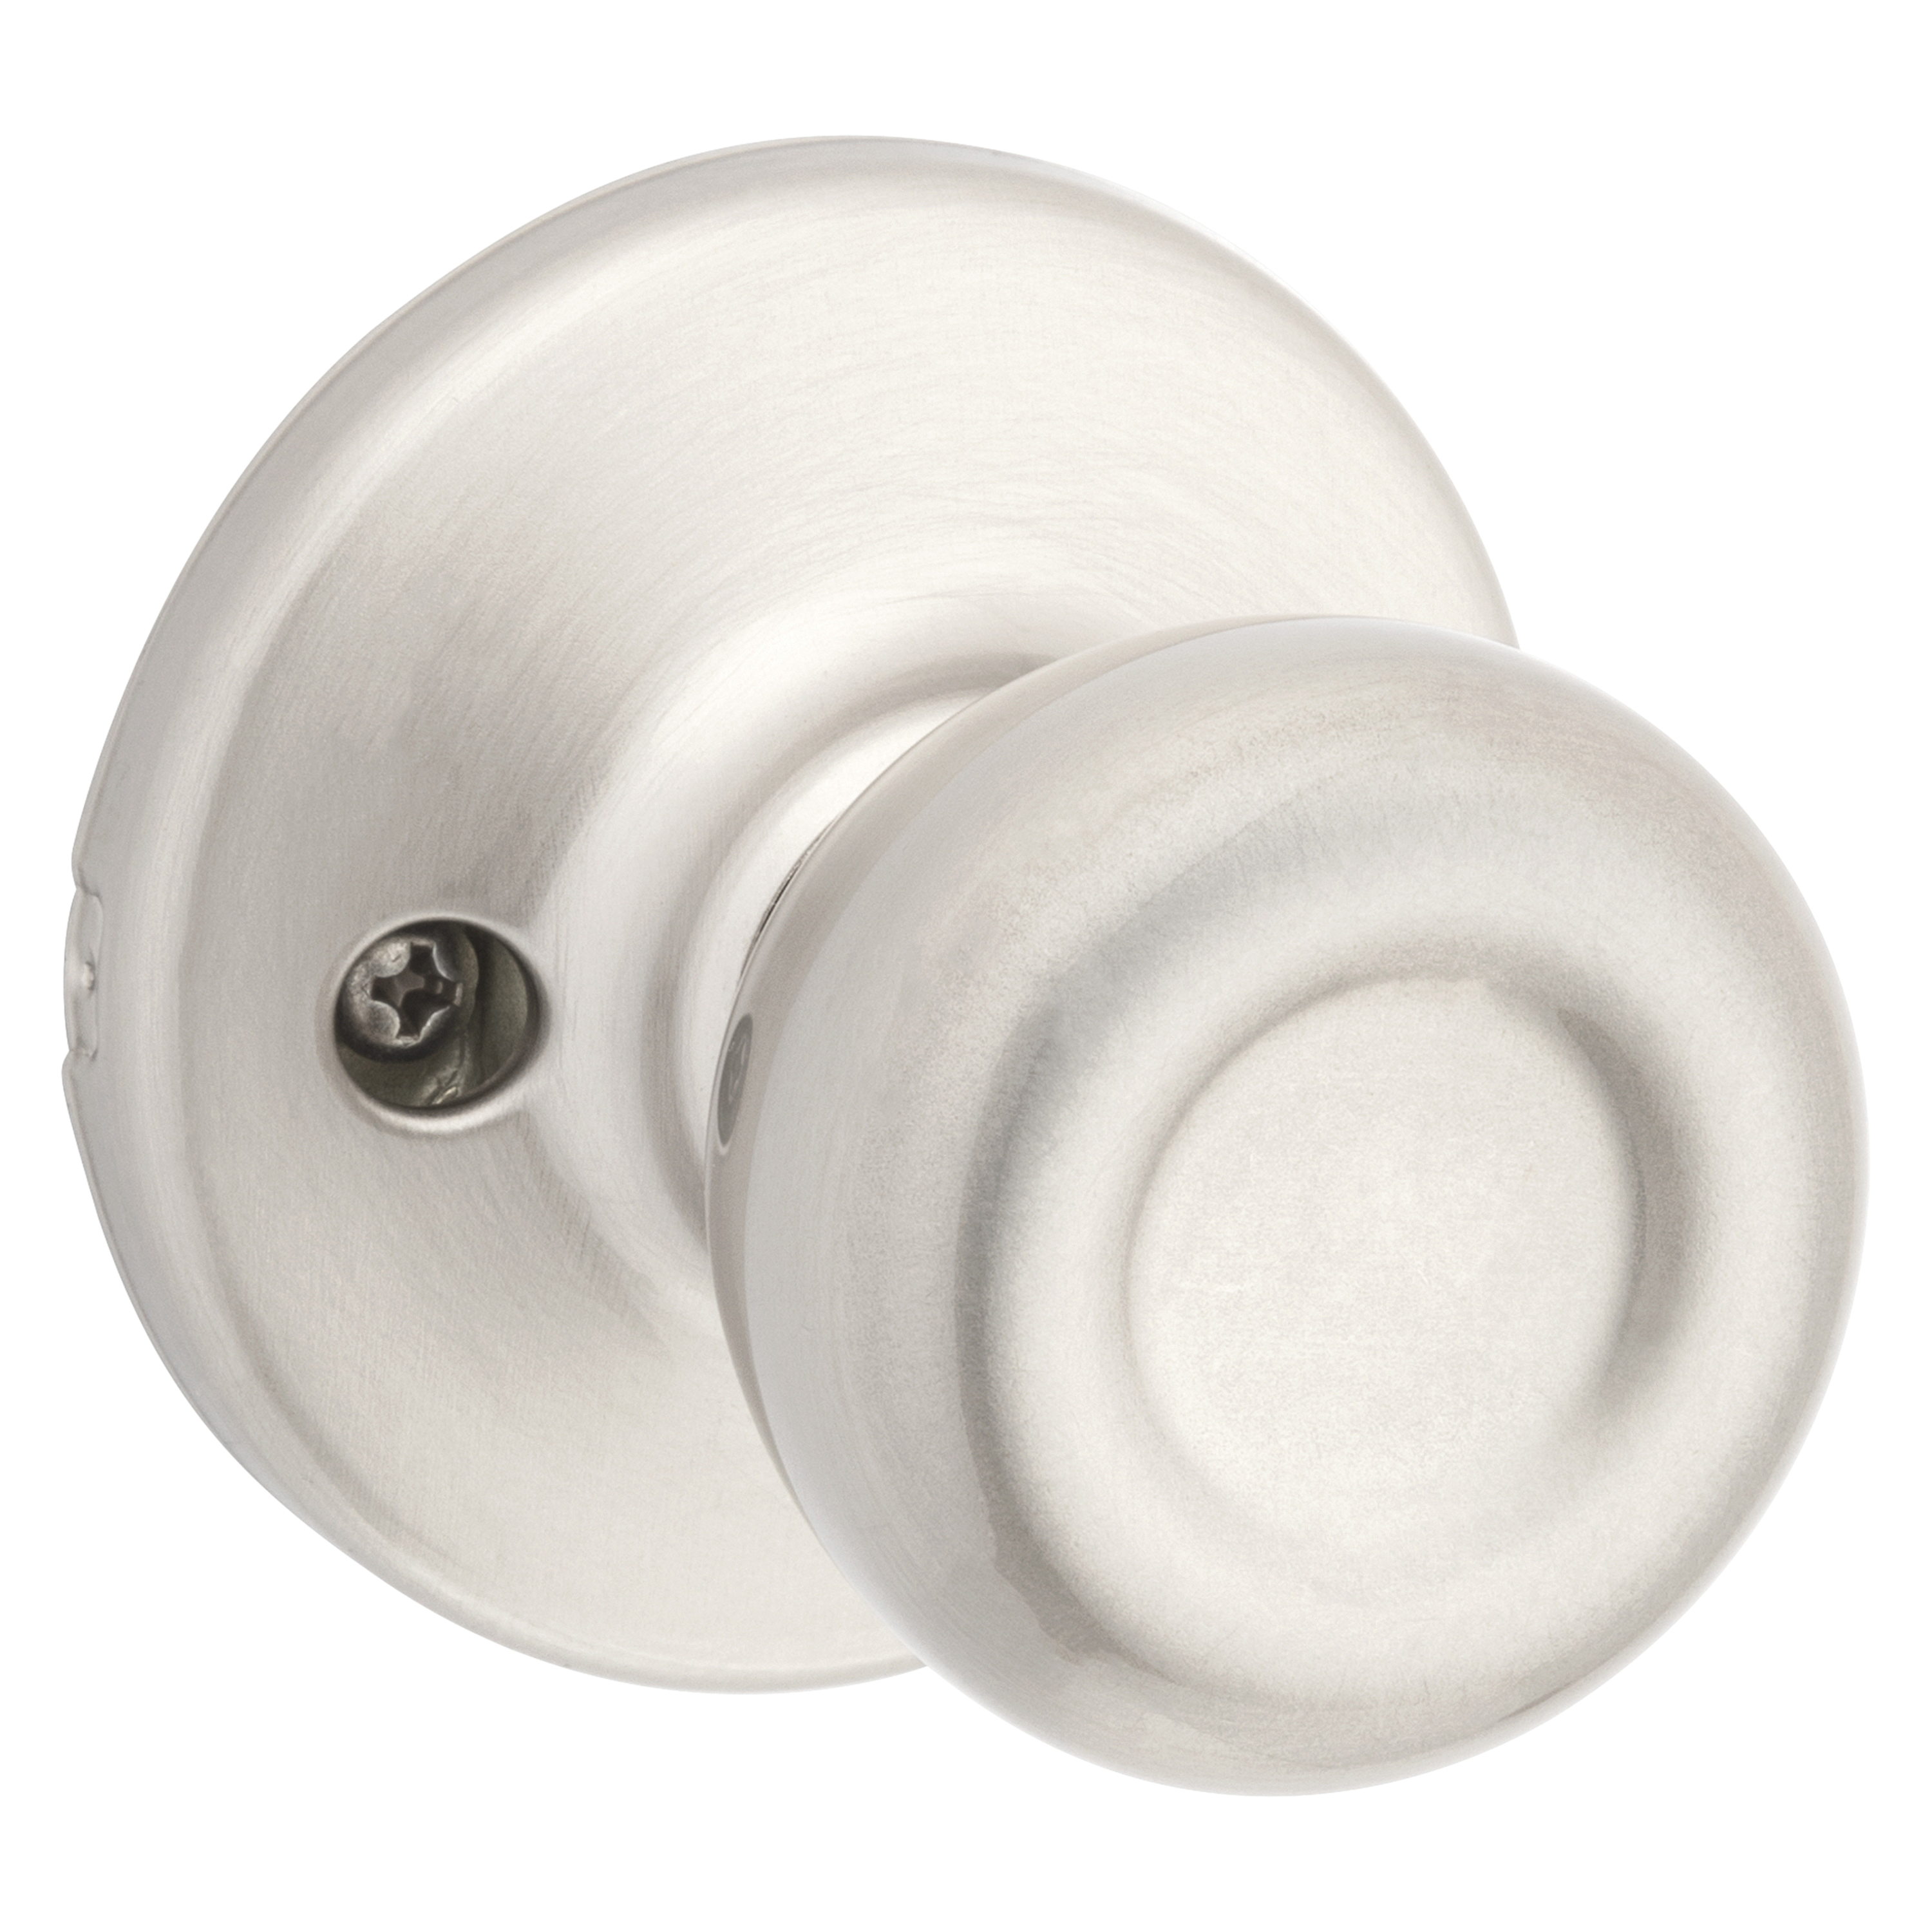 488T 15 CP Dummy Knob, Satin Nickel, For: Both Right Handed and Left Handed Doors